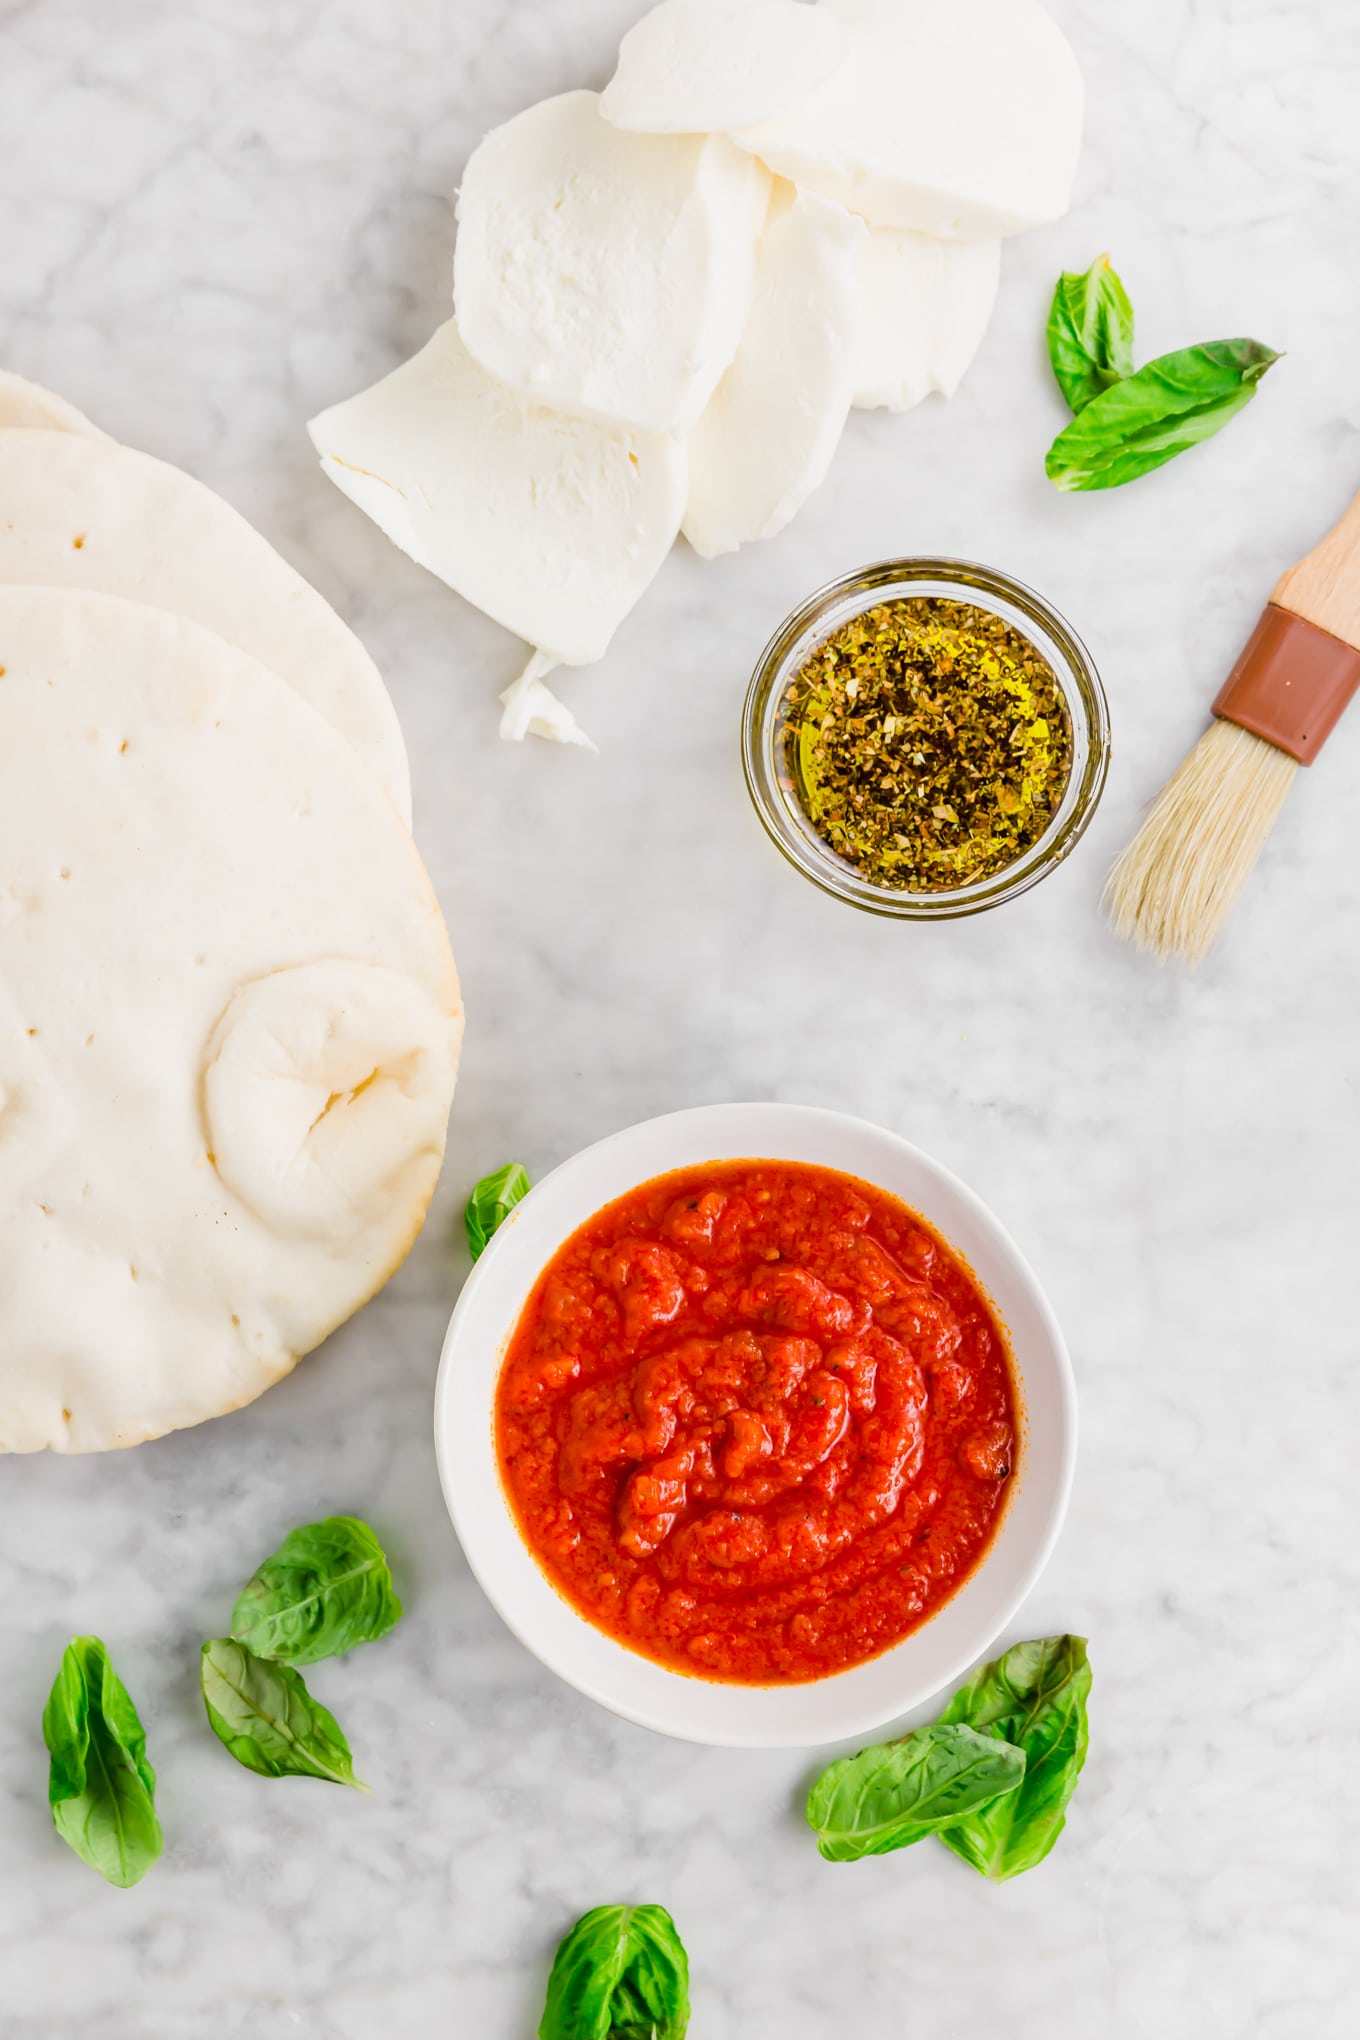 An aerial photo showing the ingredients for making pita pizza: gluten-free pita brea, marinara sauce, fresh mozzarella, olive oil, dried herbs, red pepper flakes, and fresh basil. 